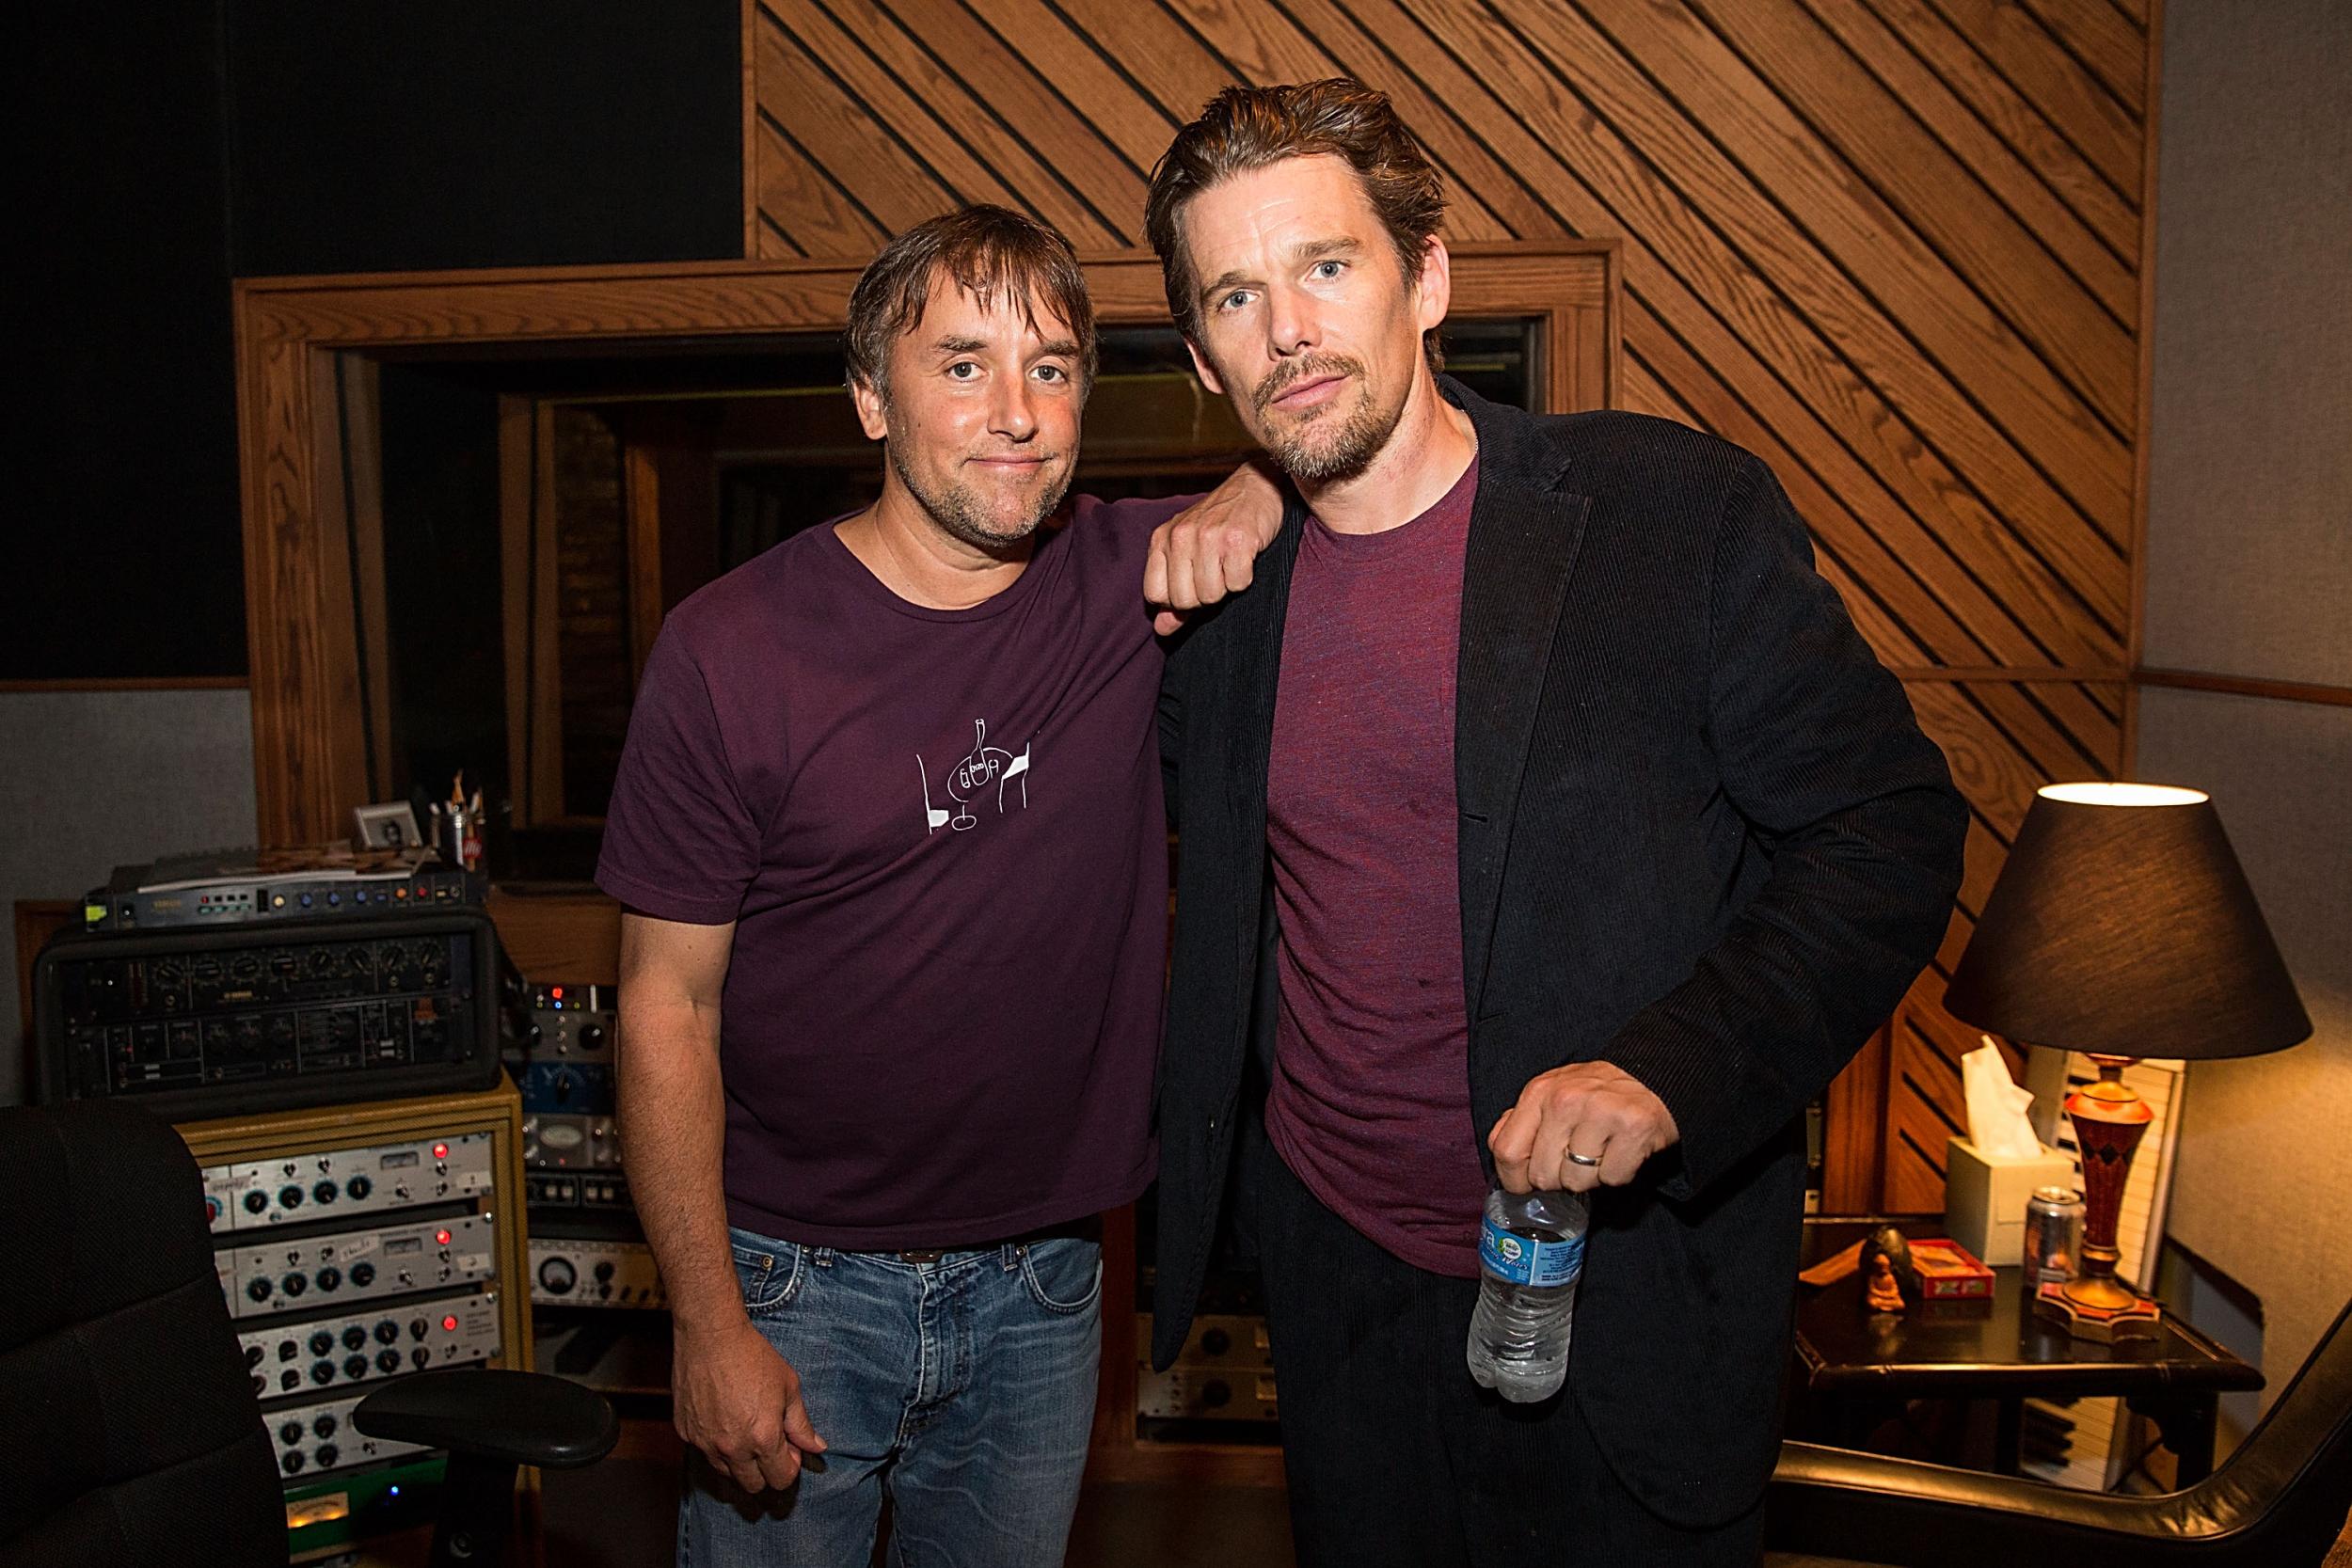 Linklater has worked with Ethan Hawke a total of eight times